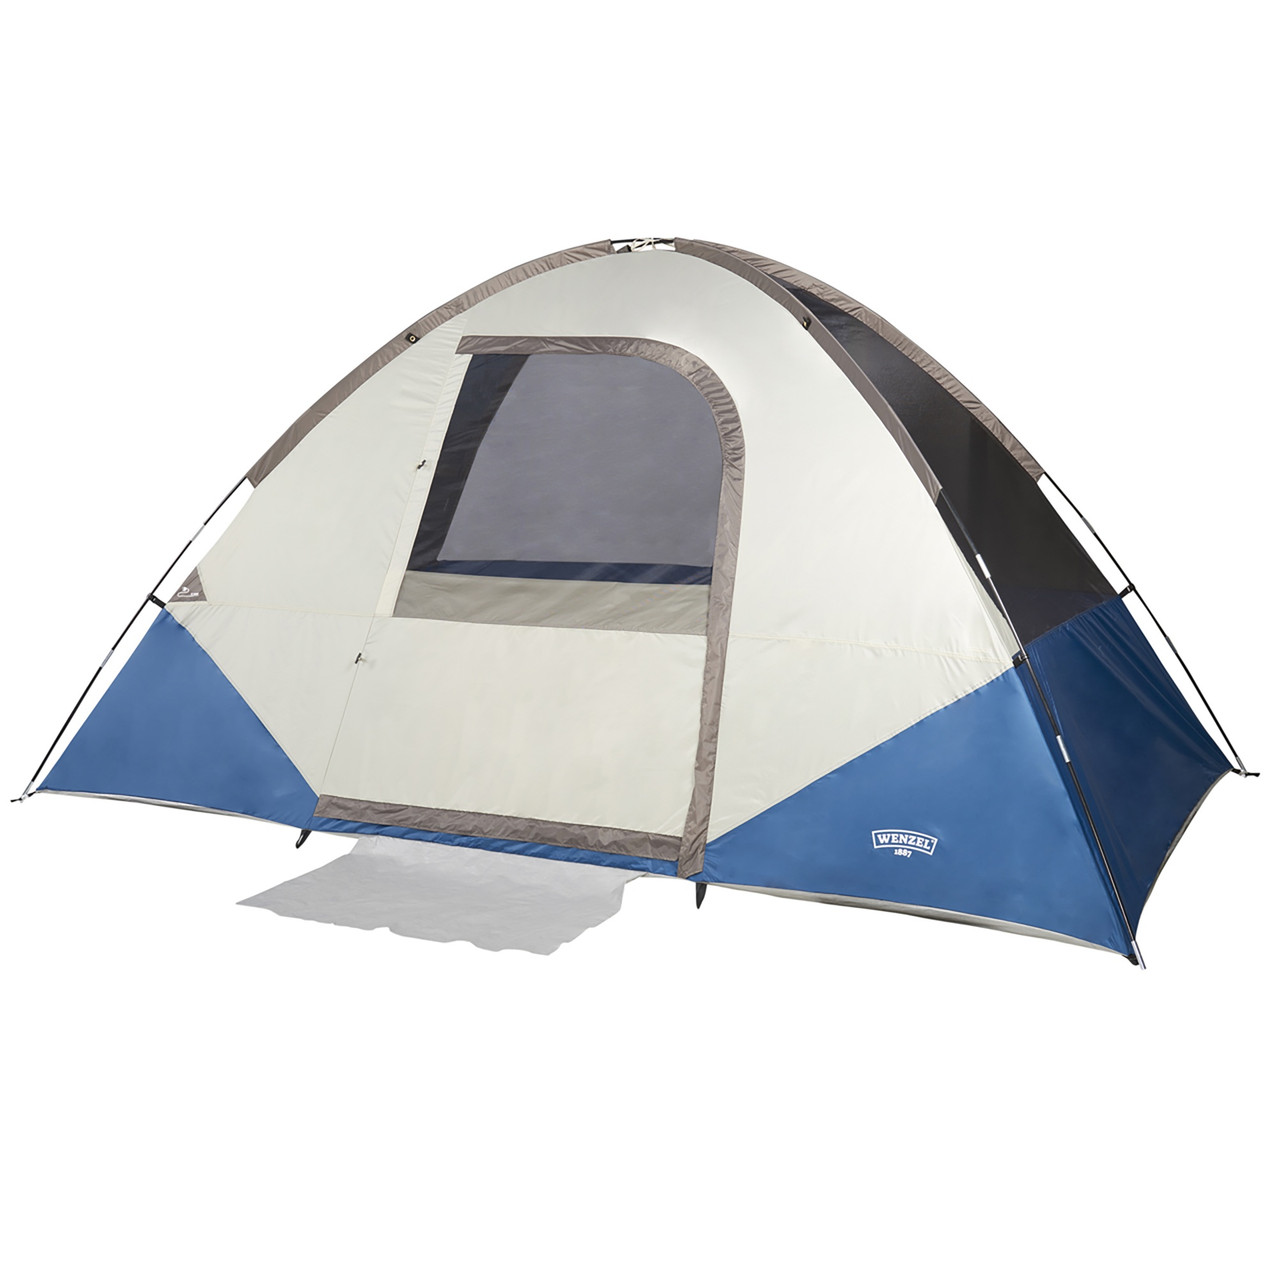 Tamarack 6 Person Dome Tent | Wenzel